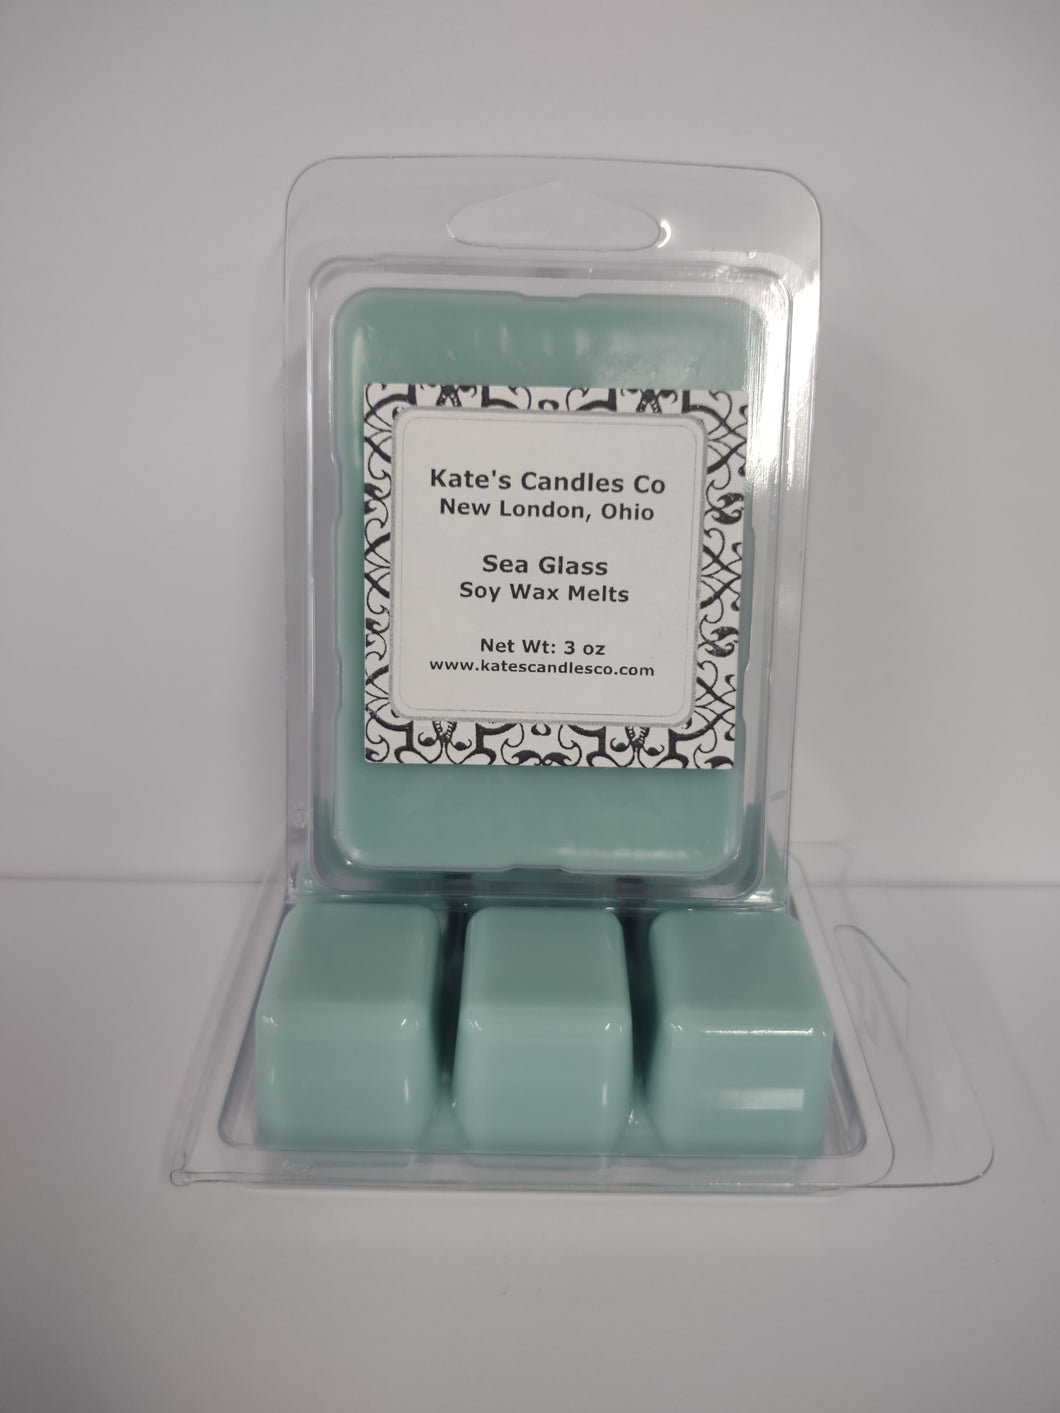 Sea Glass Soy Wax Melts - Kate's Candles Co.